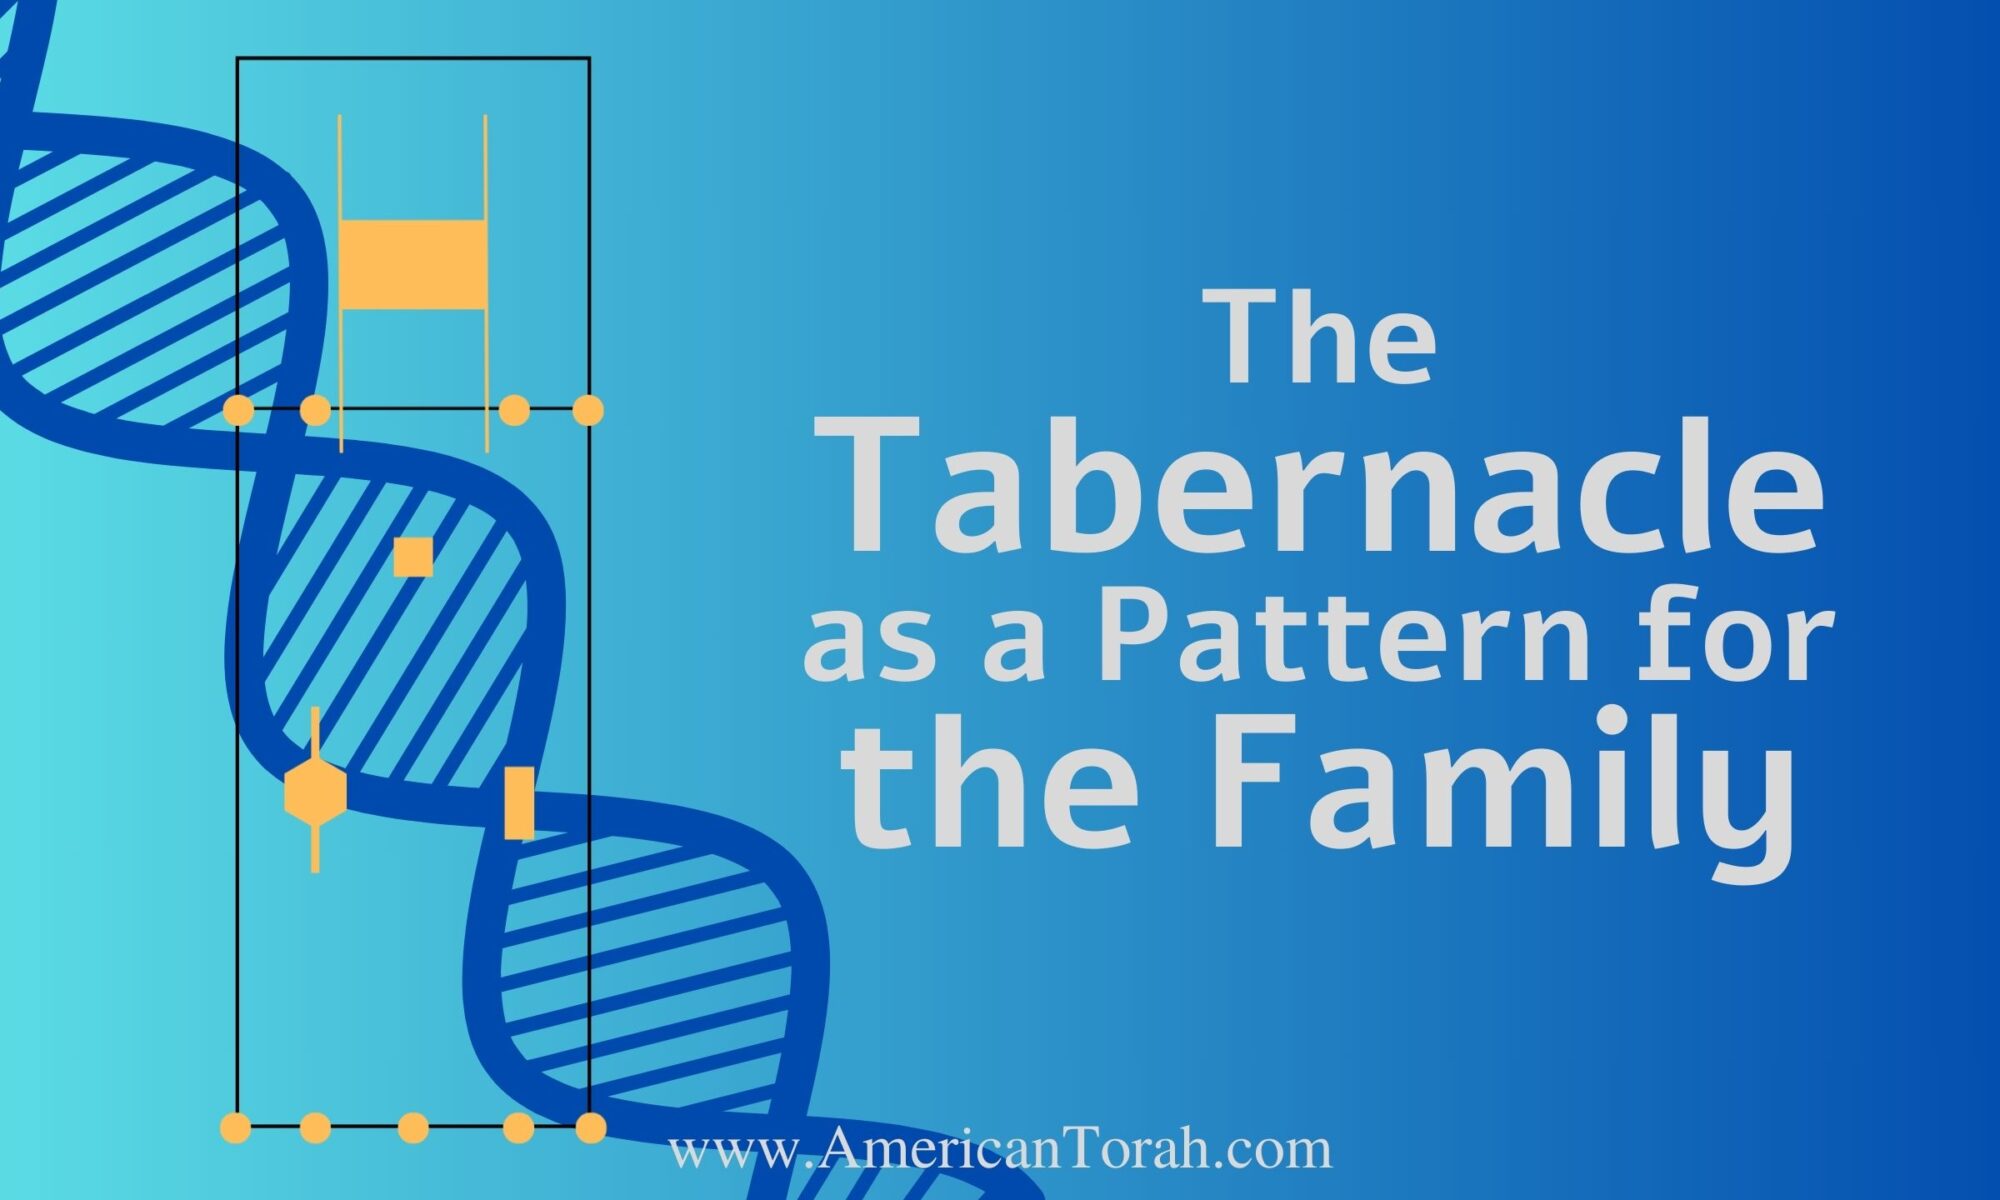 The wilderness Tabernacle is a picture of God, the individual, and the family.